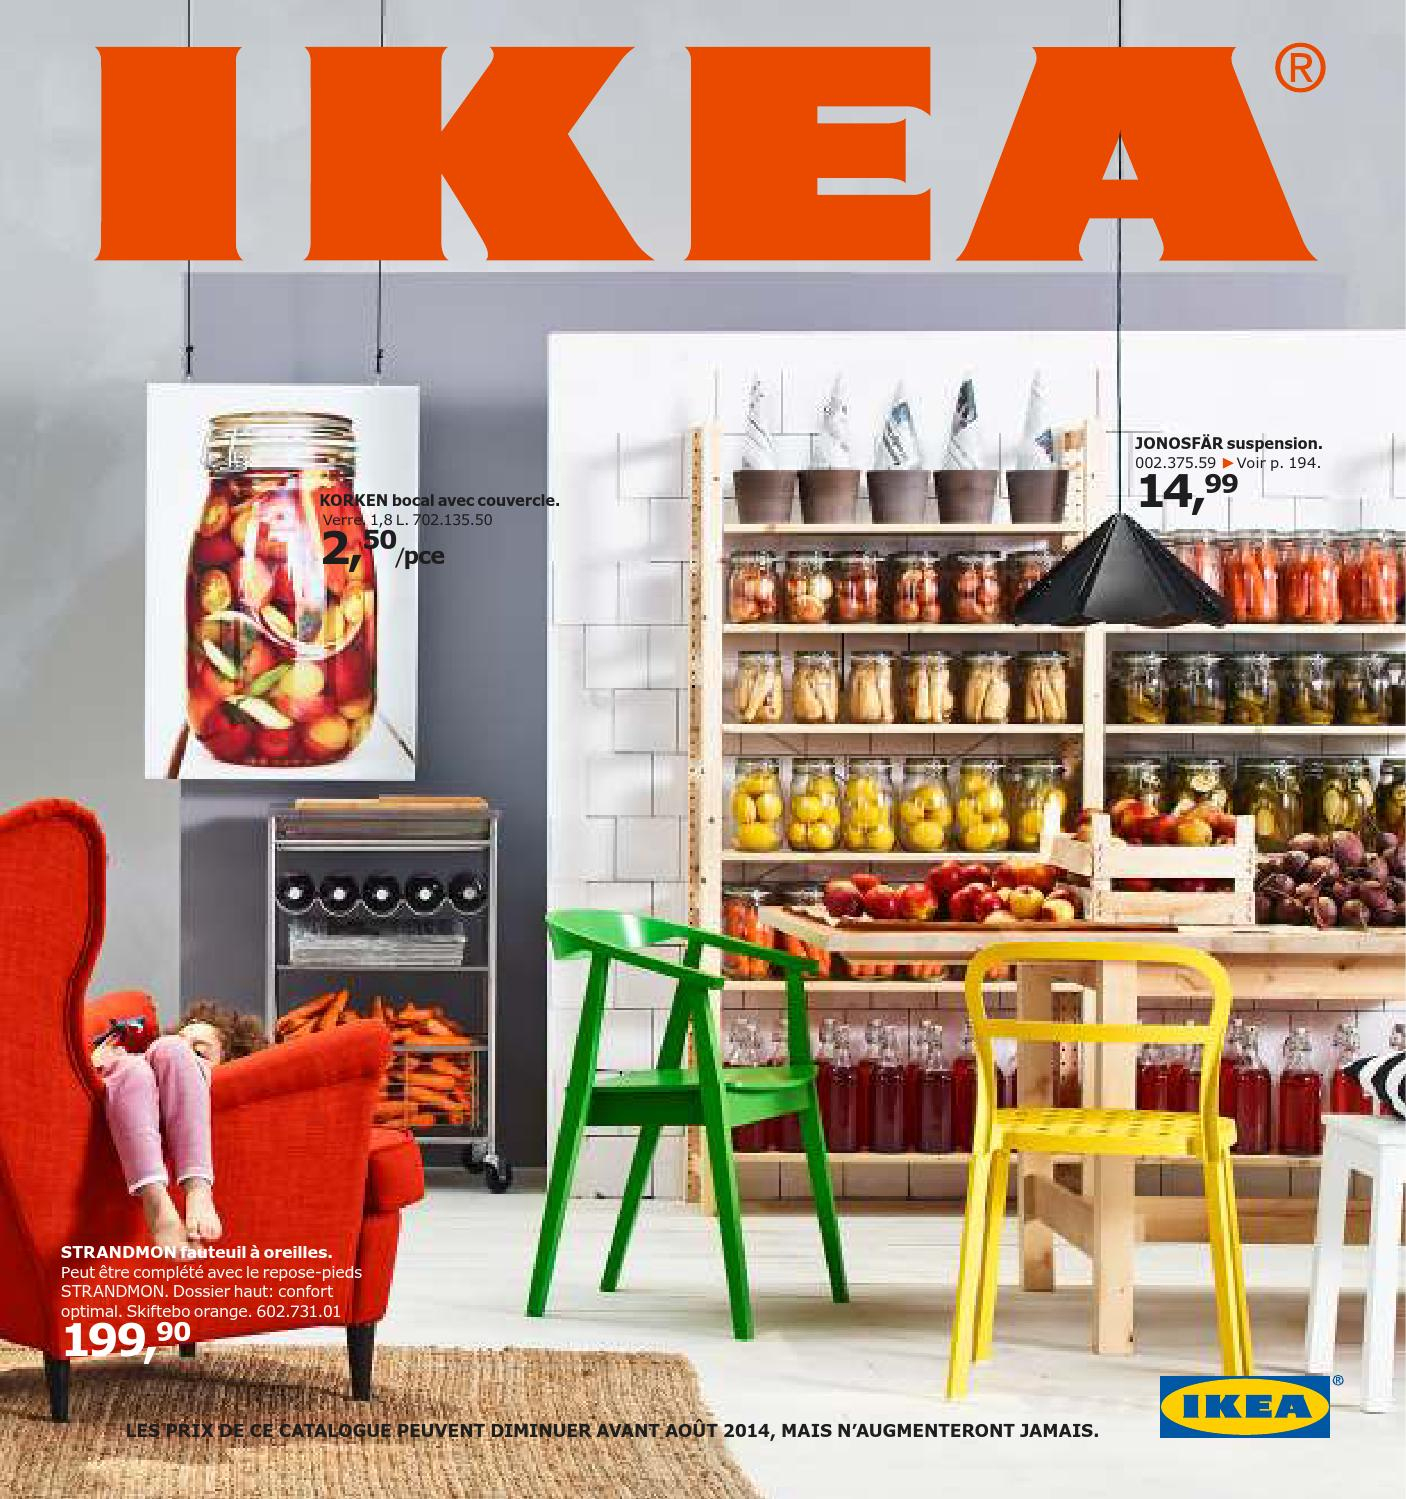 Catalogue Ikea Meubles 2014 Fr Complete By Adclick Bvba - Issuu encequiconcerne Ikea Bahut Salle Manger